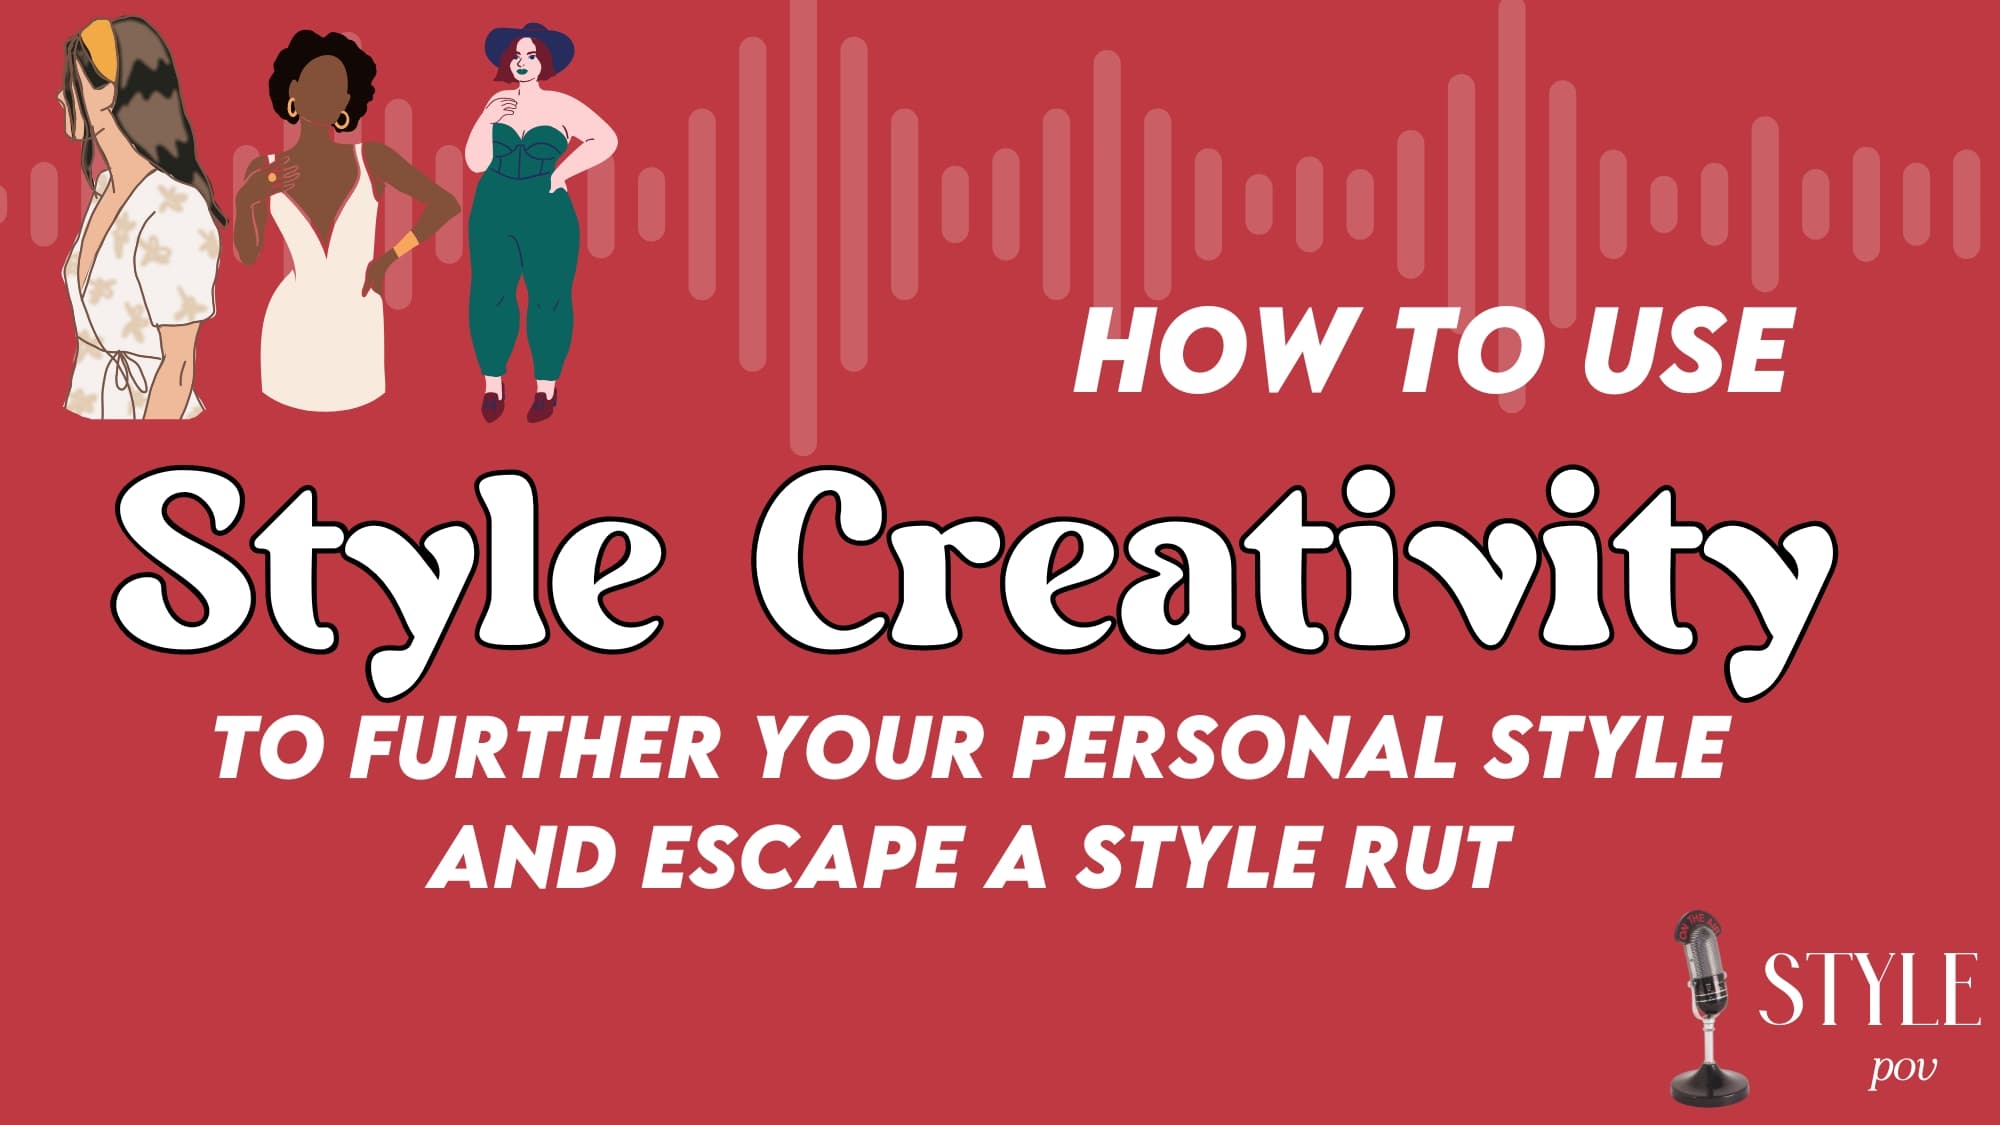 Style Creativity:  Get Out of a Style Rut and Hone Your Personal Style (ep. 2)